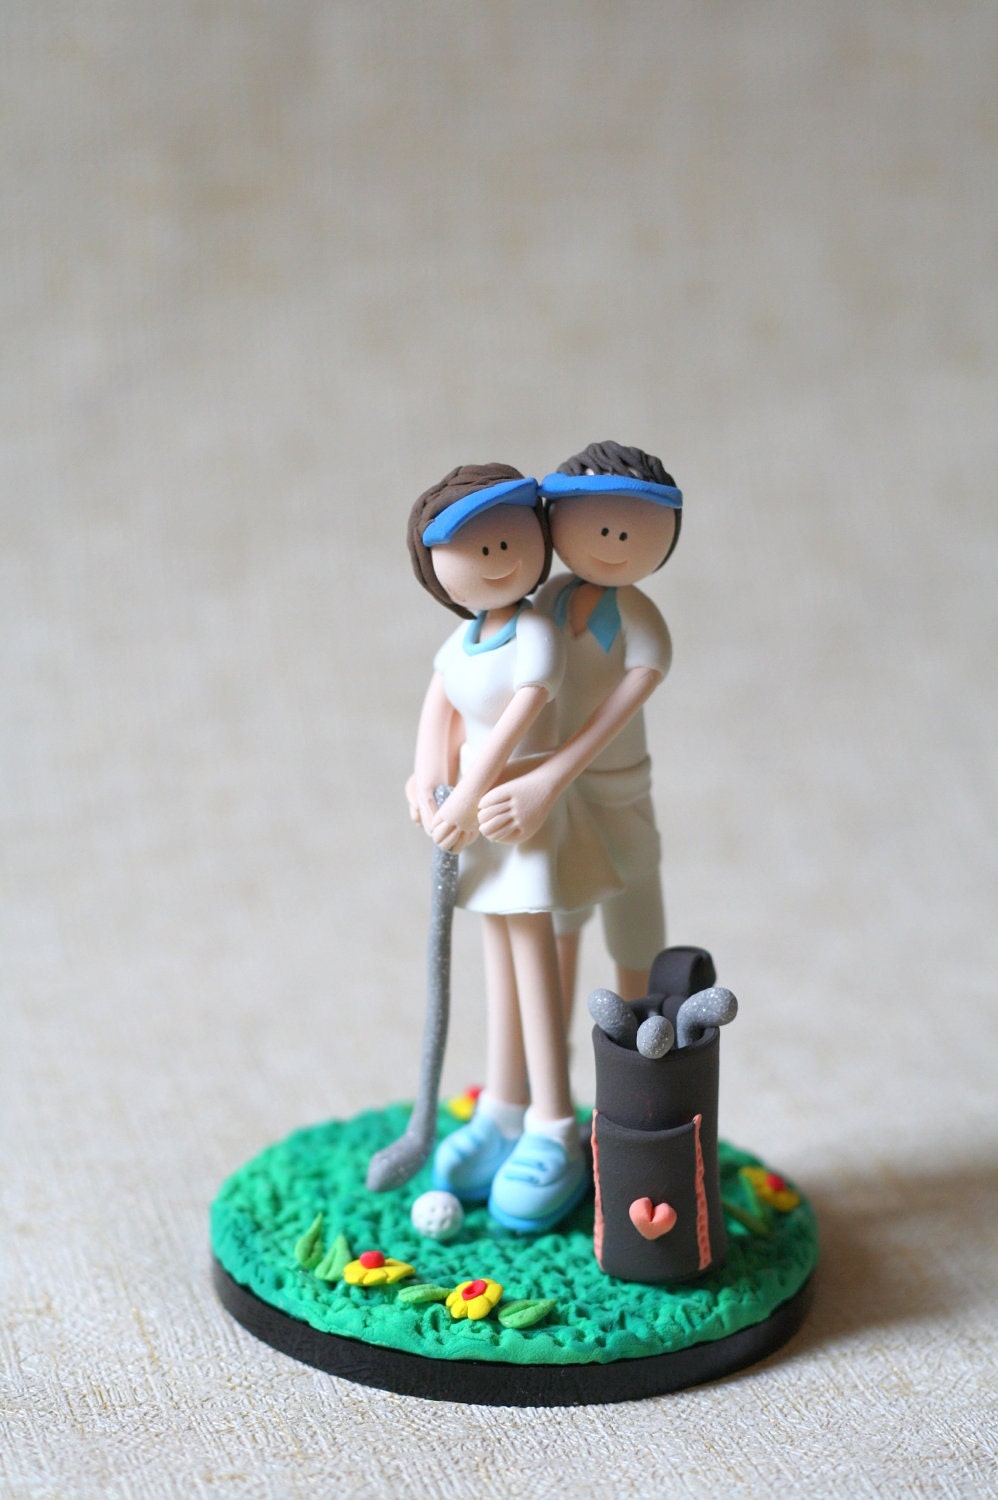 SALE PRE-MADE Valentine Gift Figurine - Couple playing golf